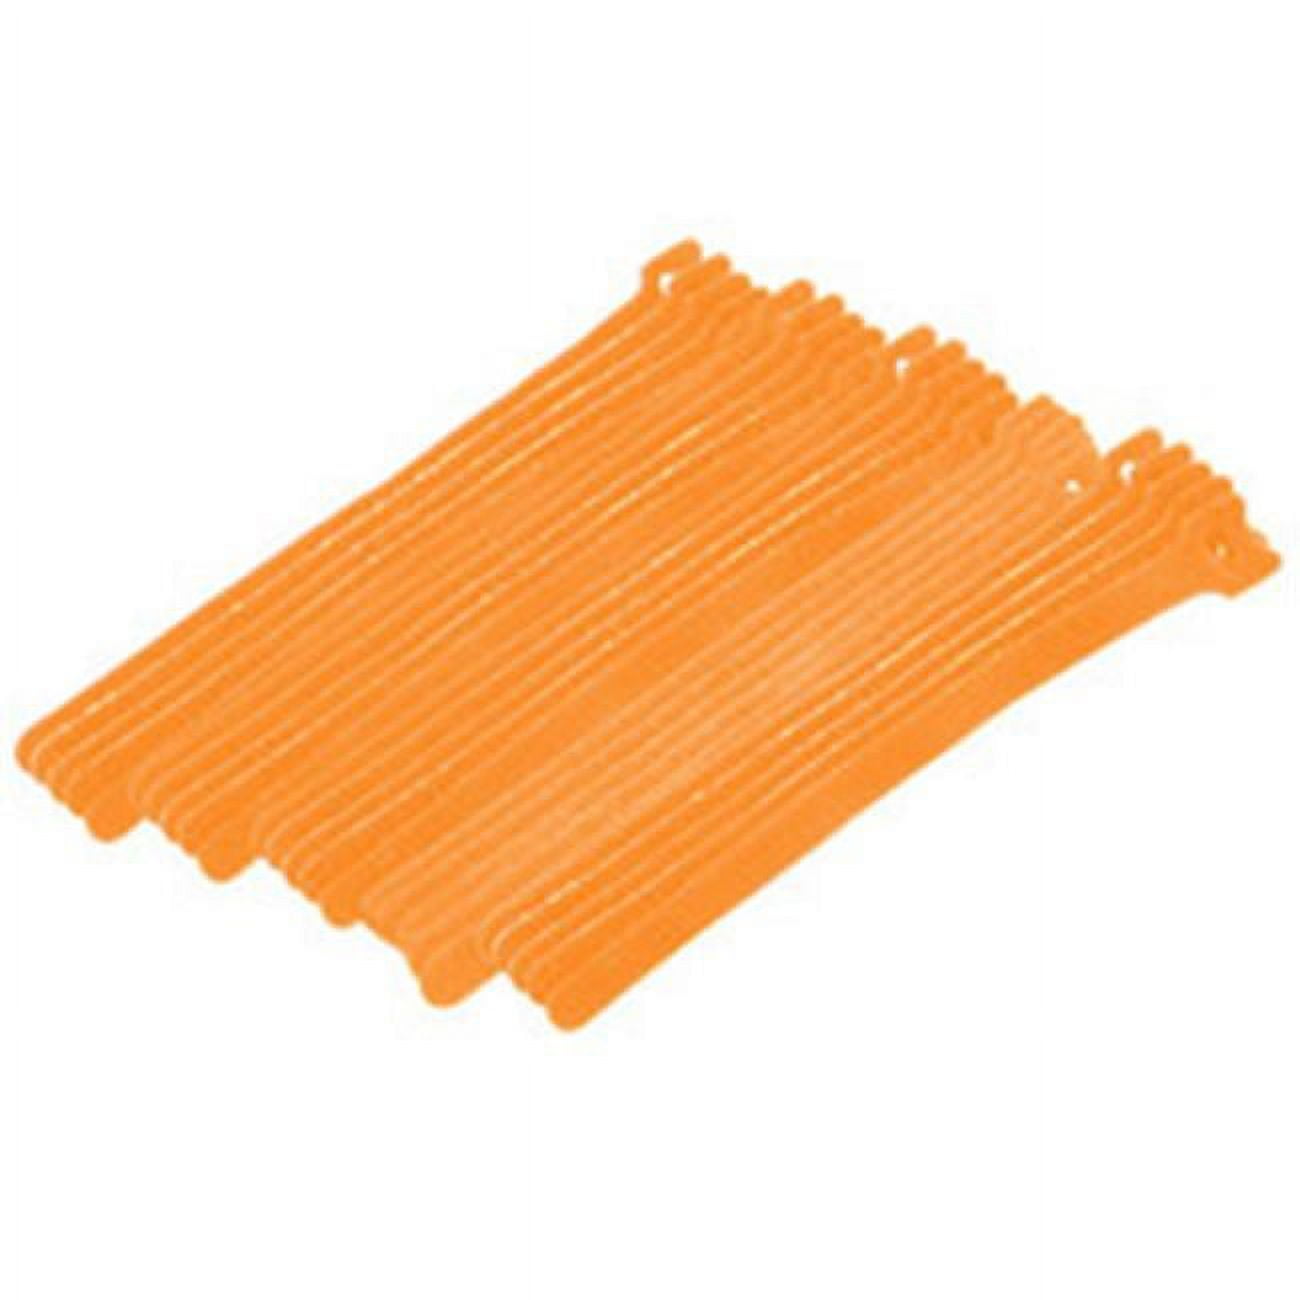 Picture of CableWholesale 30CT-03180 0.50 x 8 in. Orange Hook & Loop Cable Strap with Eye - Pack of 25